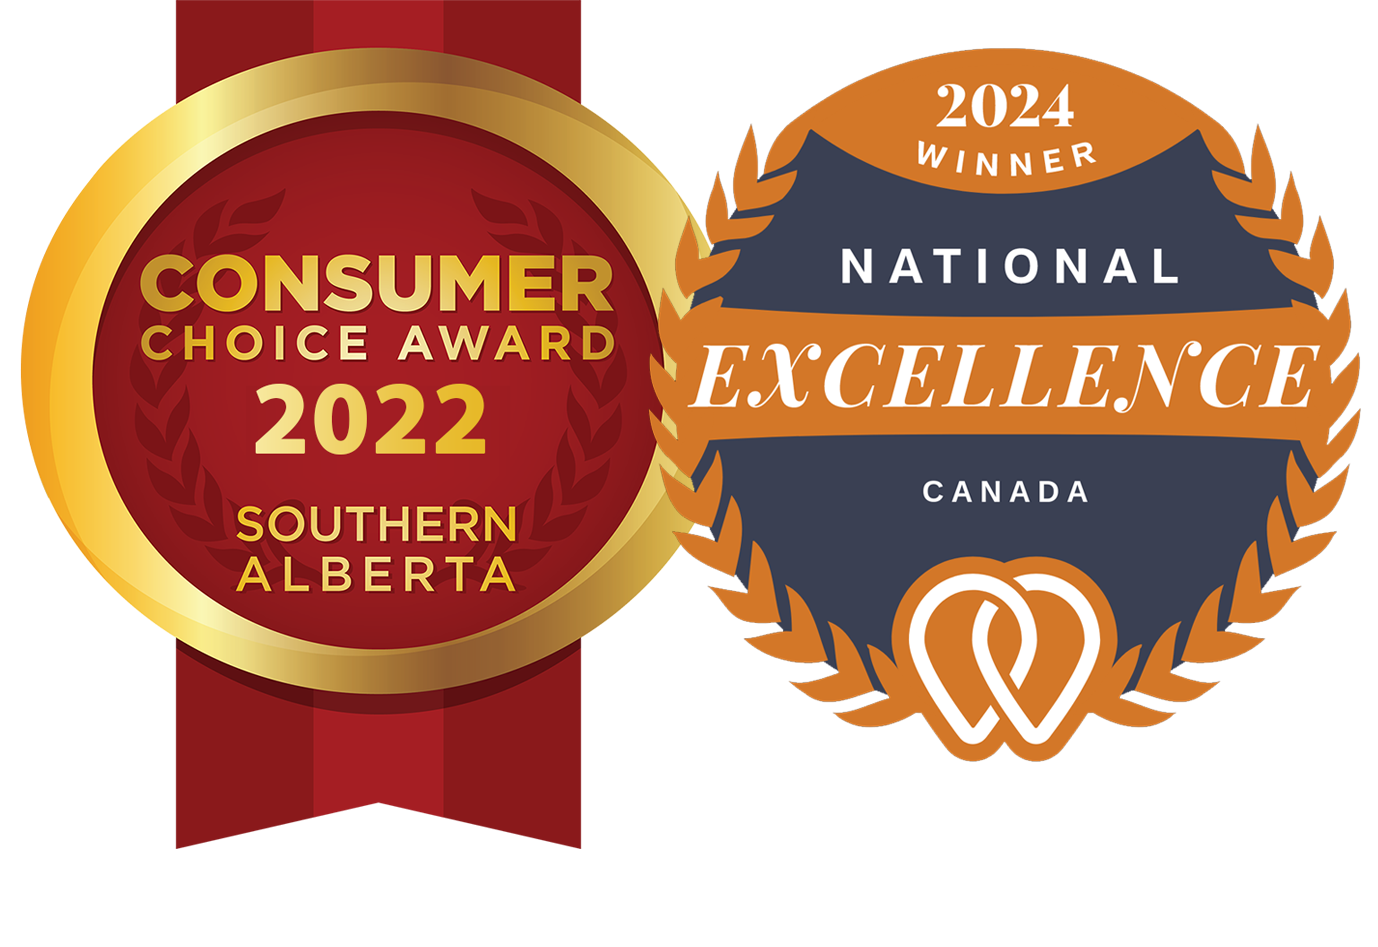 2024 Winner National Excellence Canada and Consumer Choice Award 2022 Southern Alberta and - Ace SEO Consulting